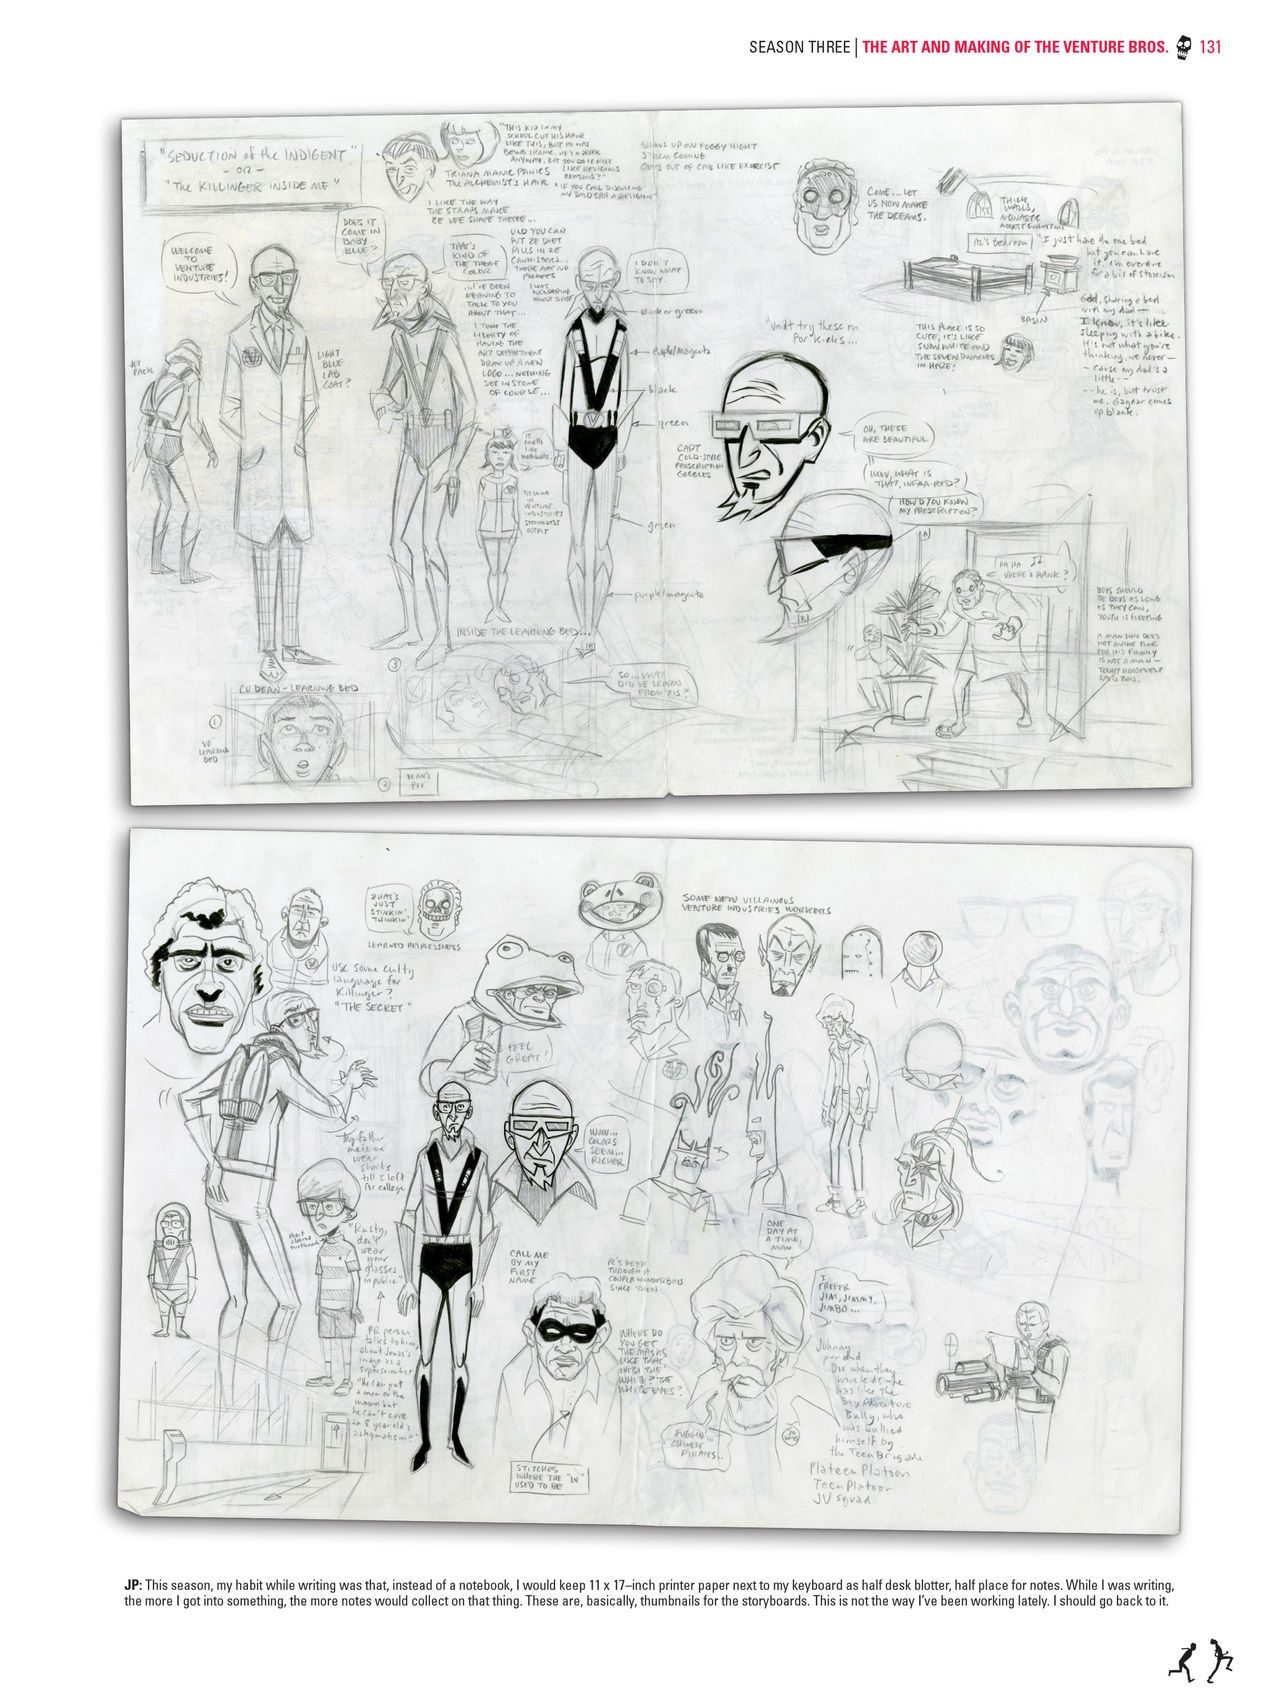 Go Team Venture! - The Art and Making of the Venture Bros 129